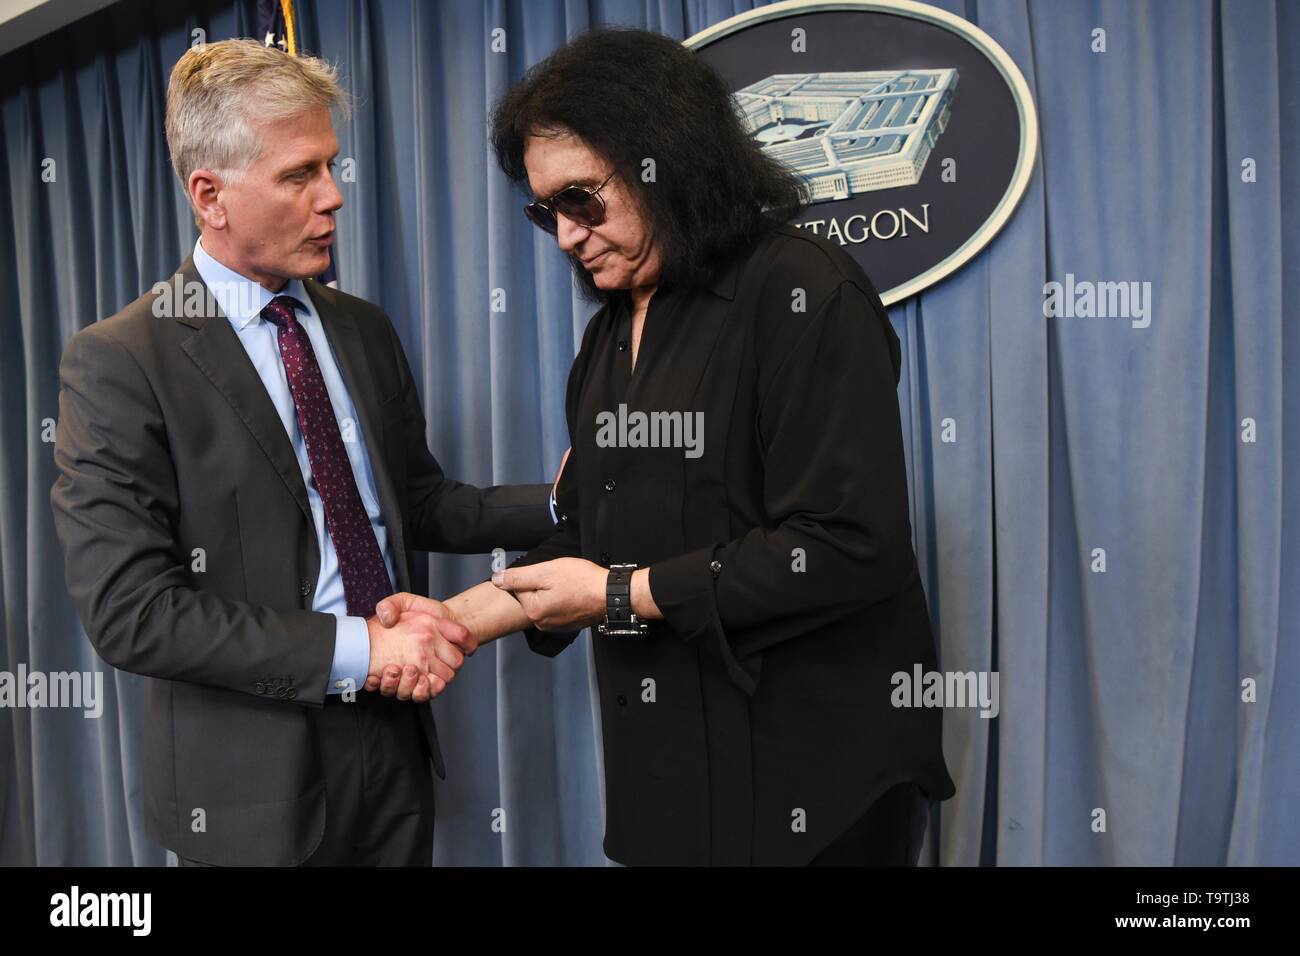 U.S. Assistant to the Secretary of Defense for Public Affairs Charles E. Summers Jr. left, shakes hands with rock legend Gene Simmons of KISS during a meet-and-greet at the Pentagon May 16, 2019 in Washington, D.C. Stock Photo